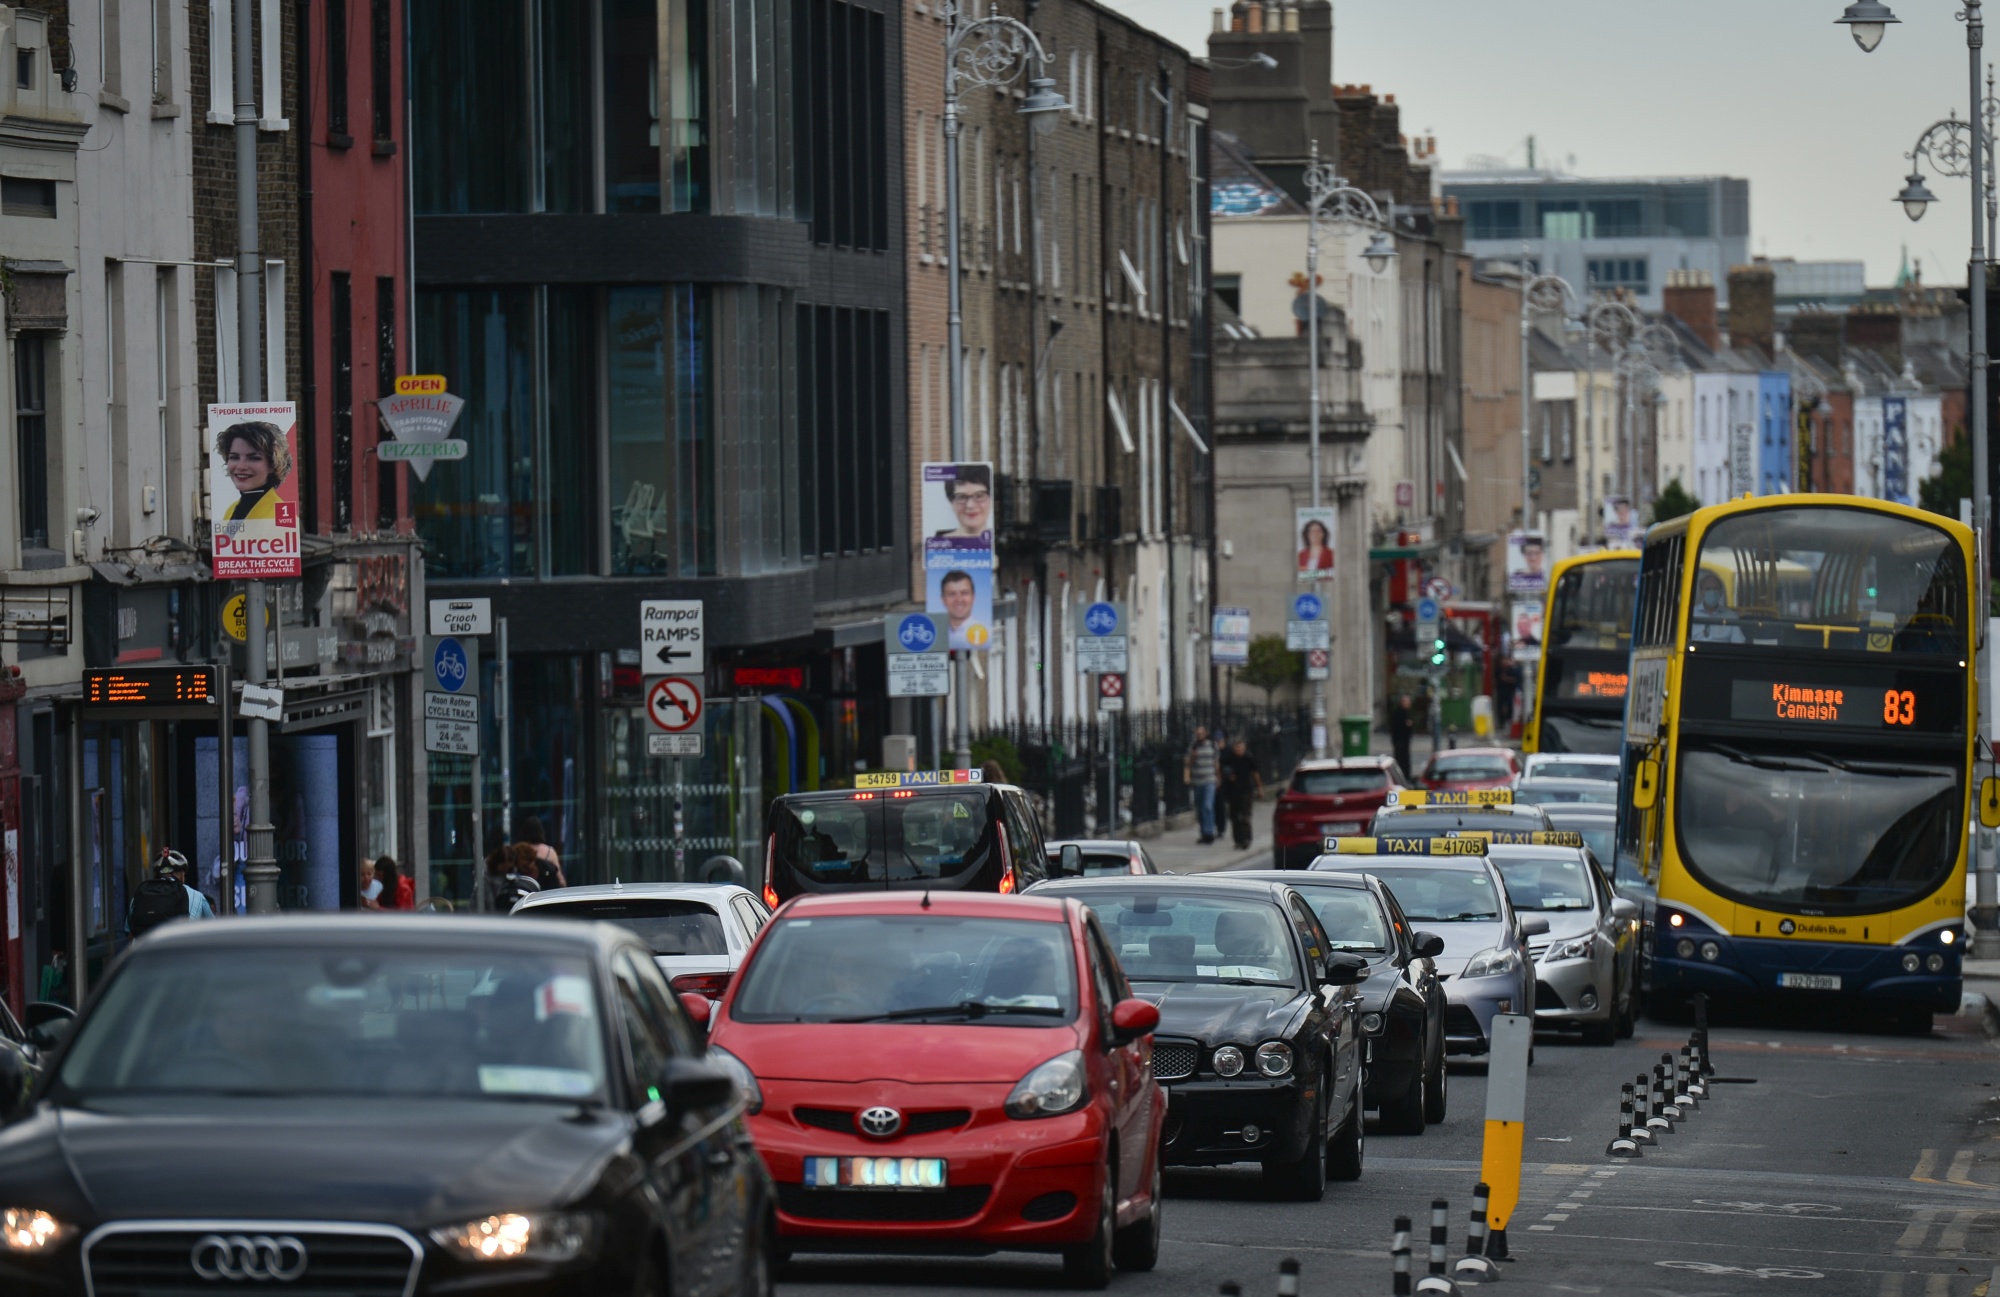 Busy traffic has long been a fixture of downtown Dublin.